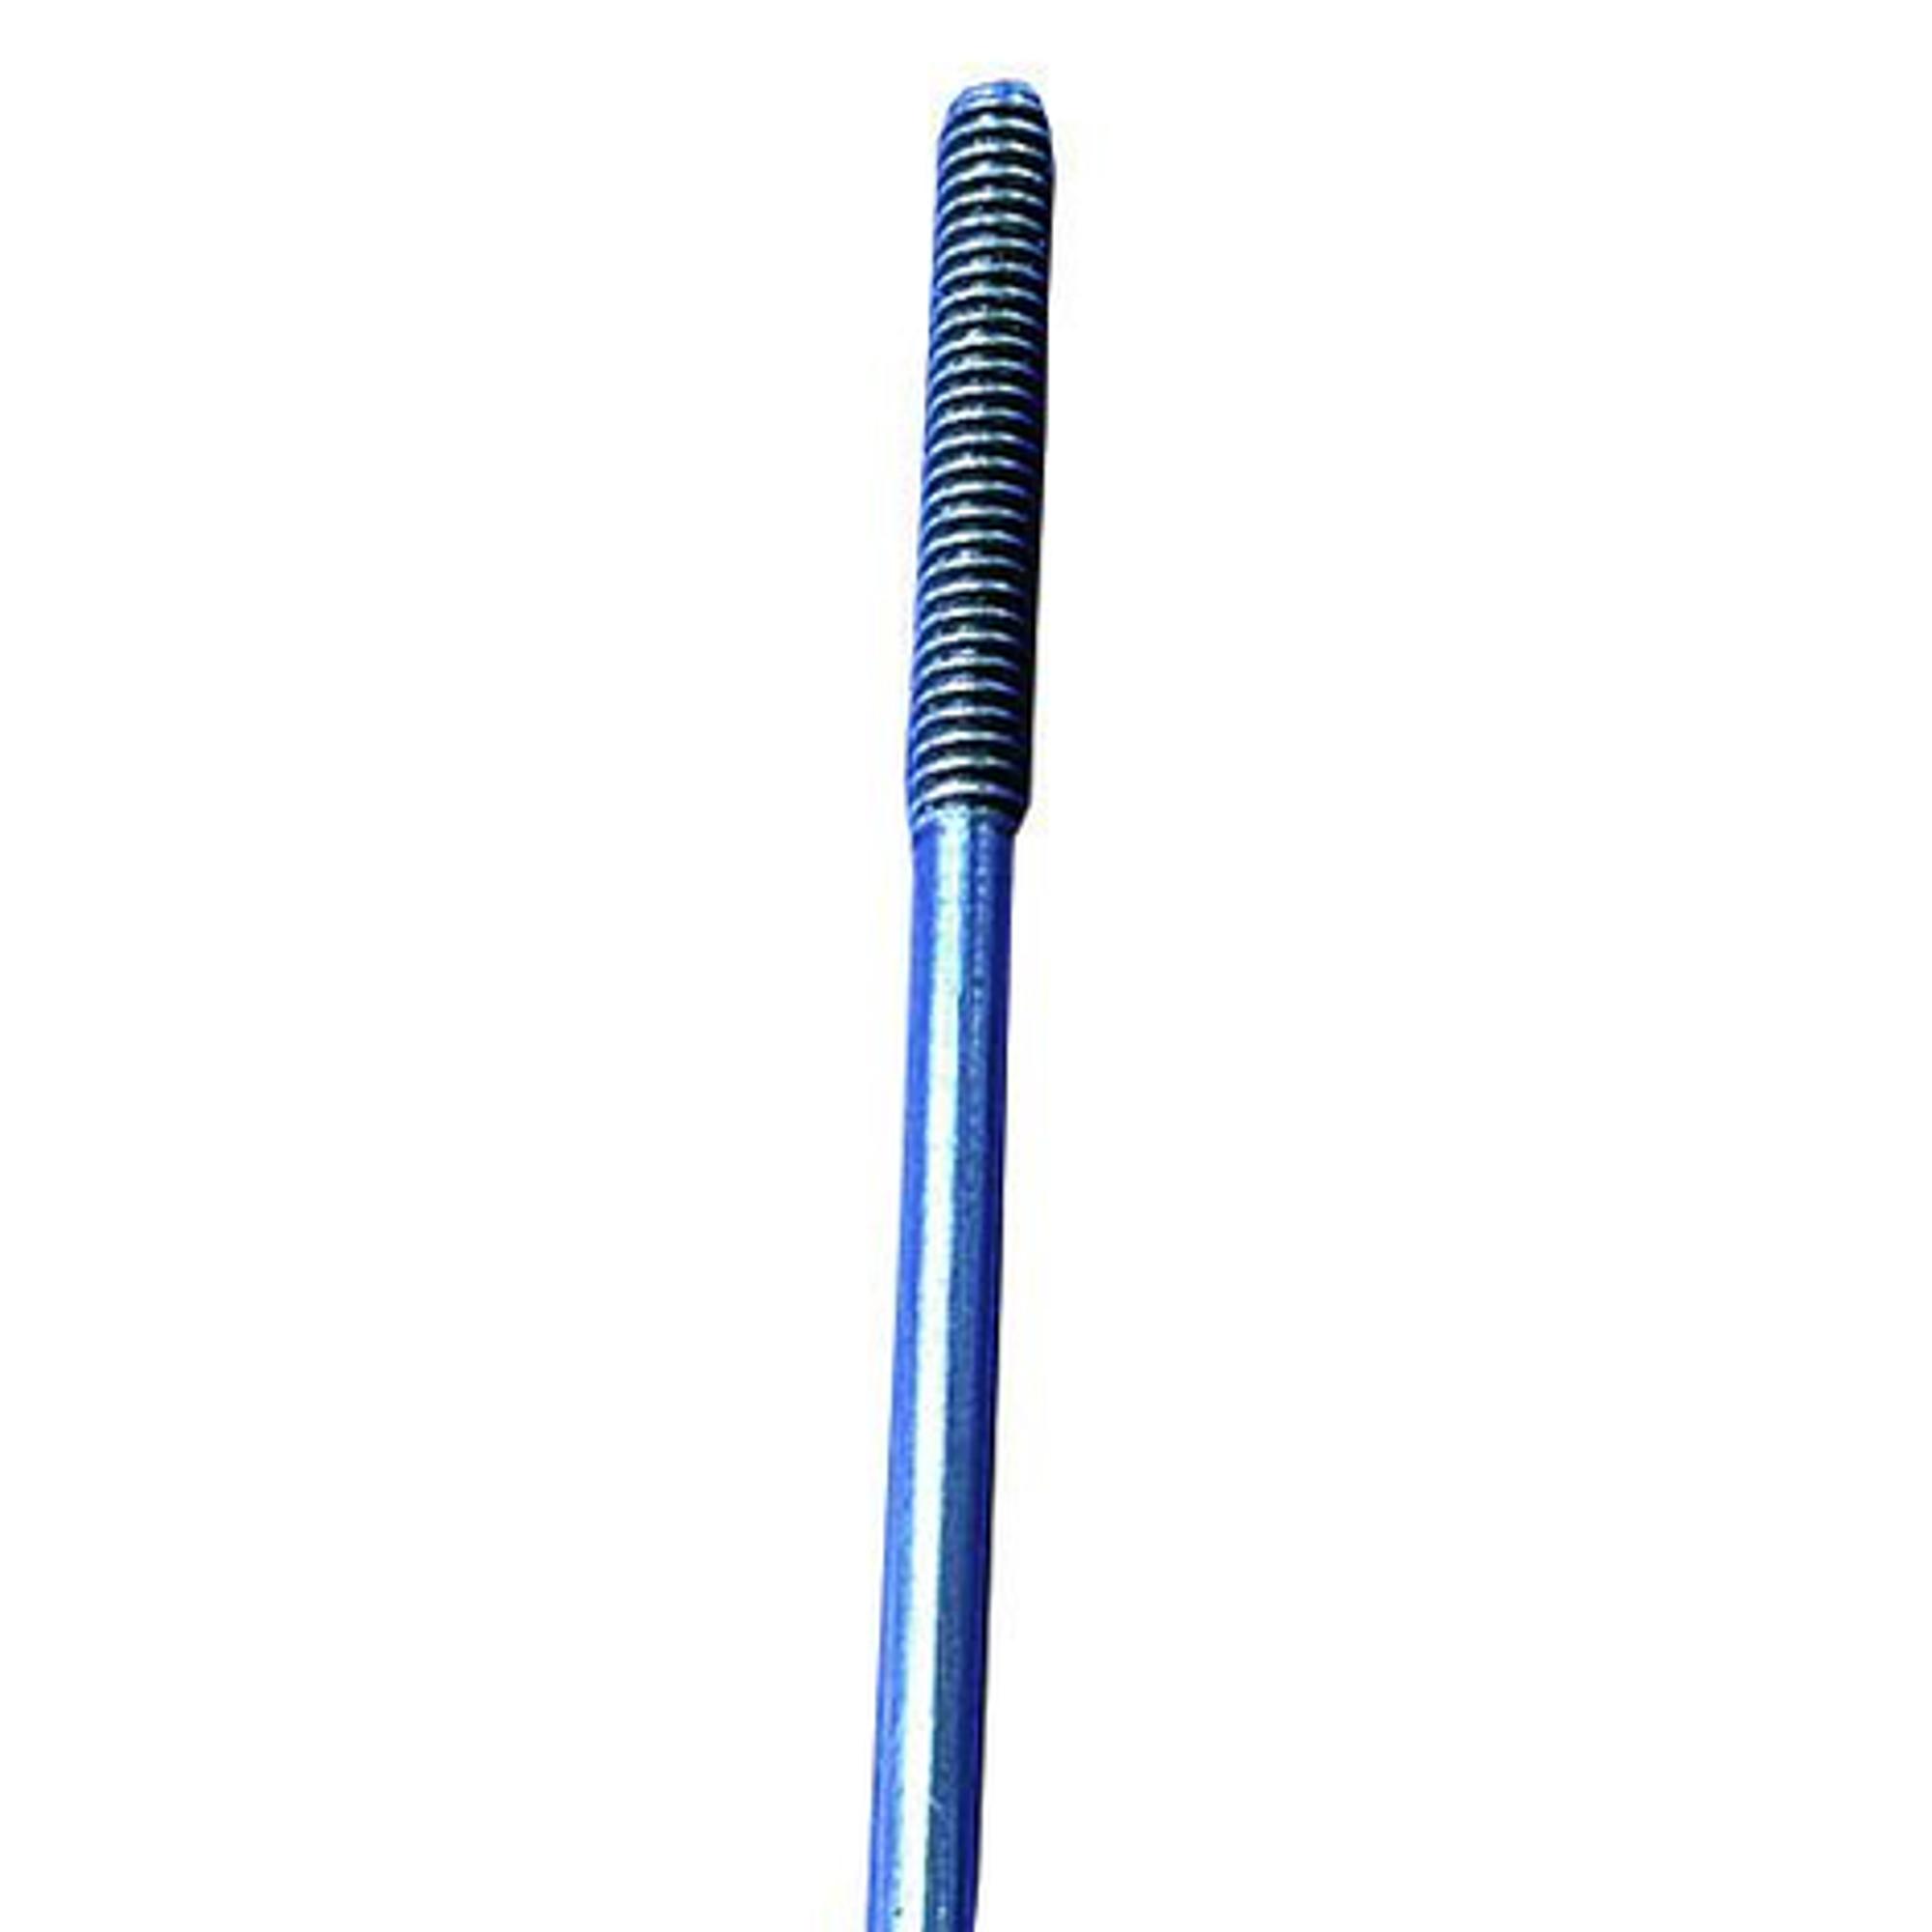 Dubro 4-40 Threaded Rods (12